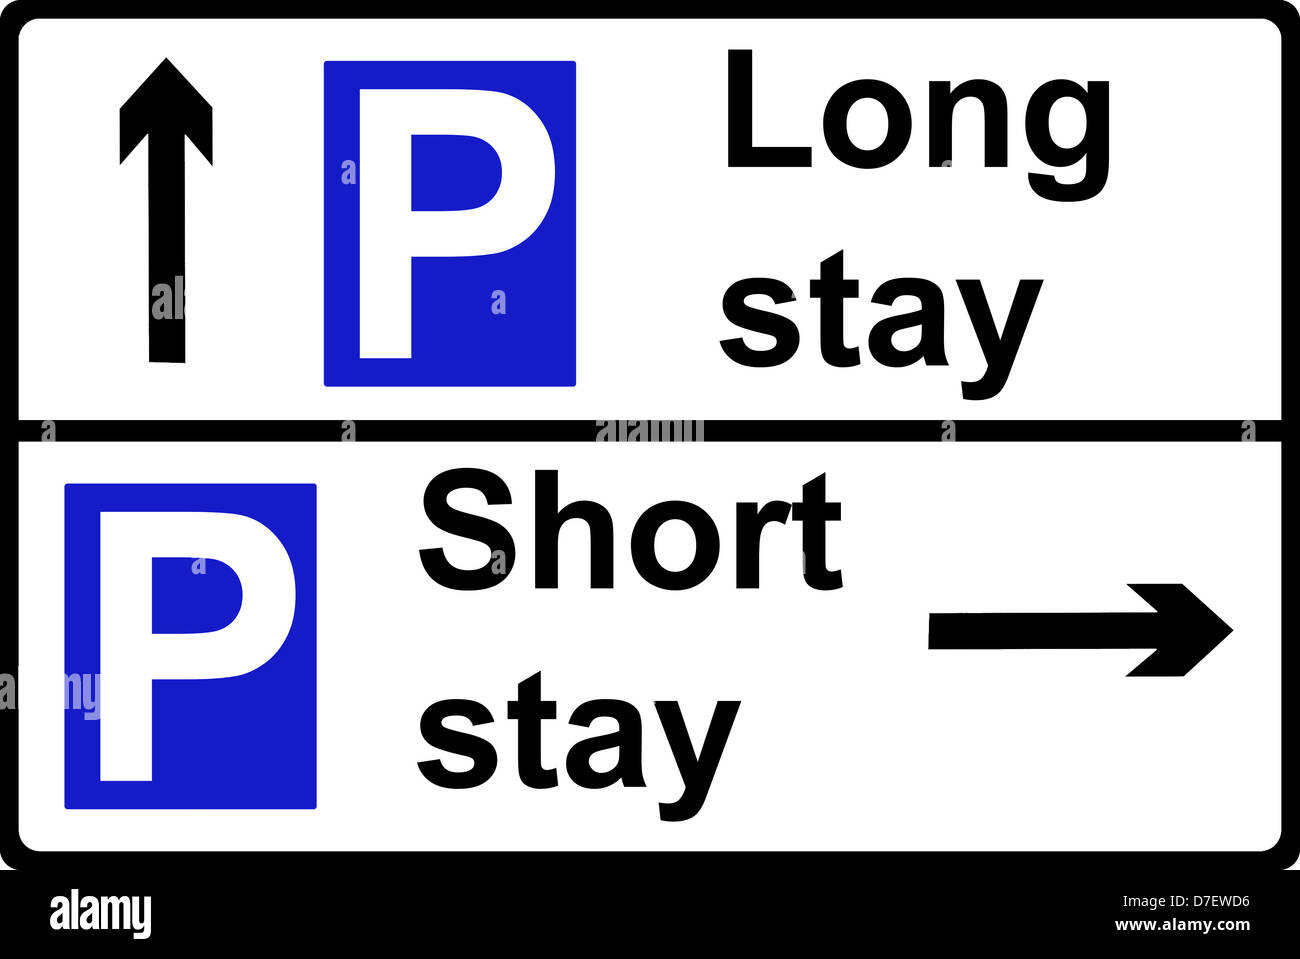 Parking place sign Stock Photo